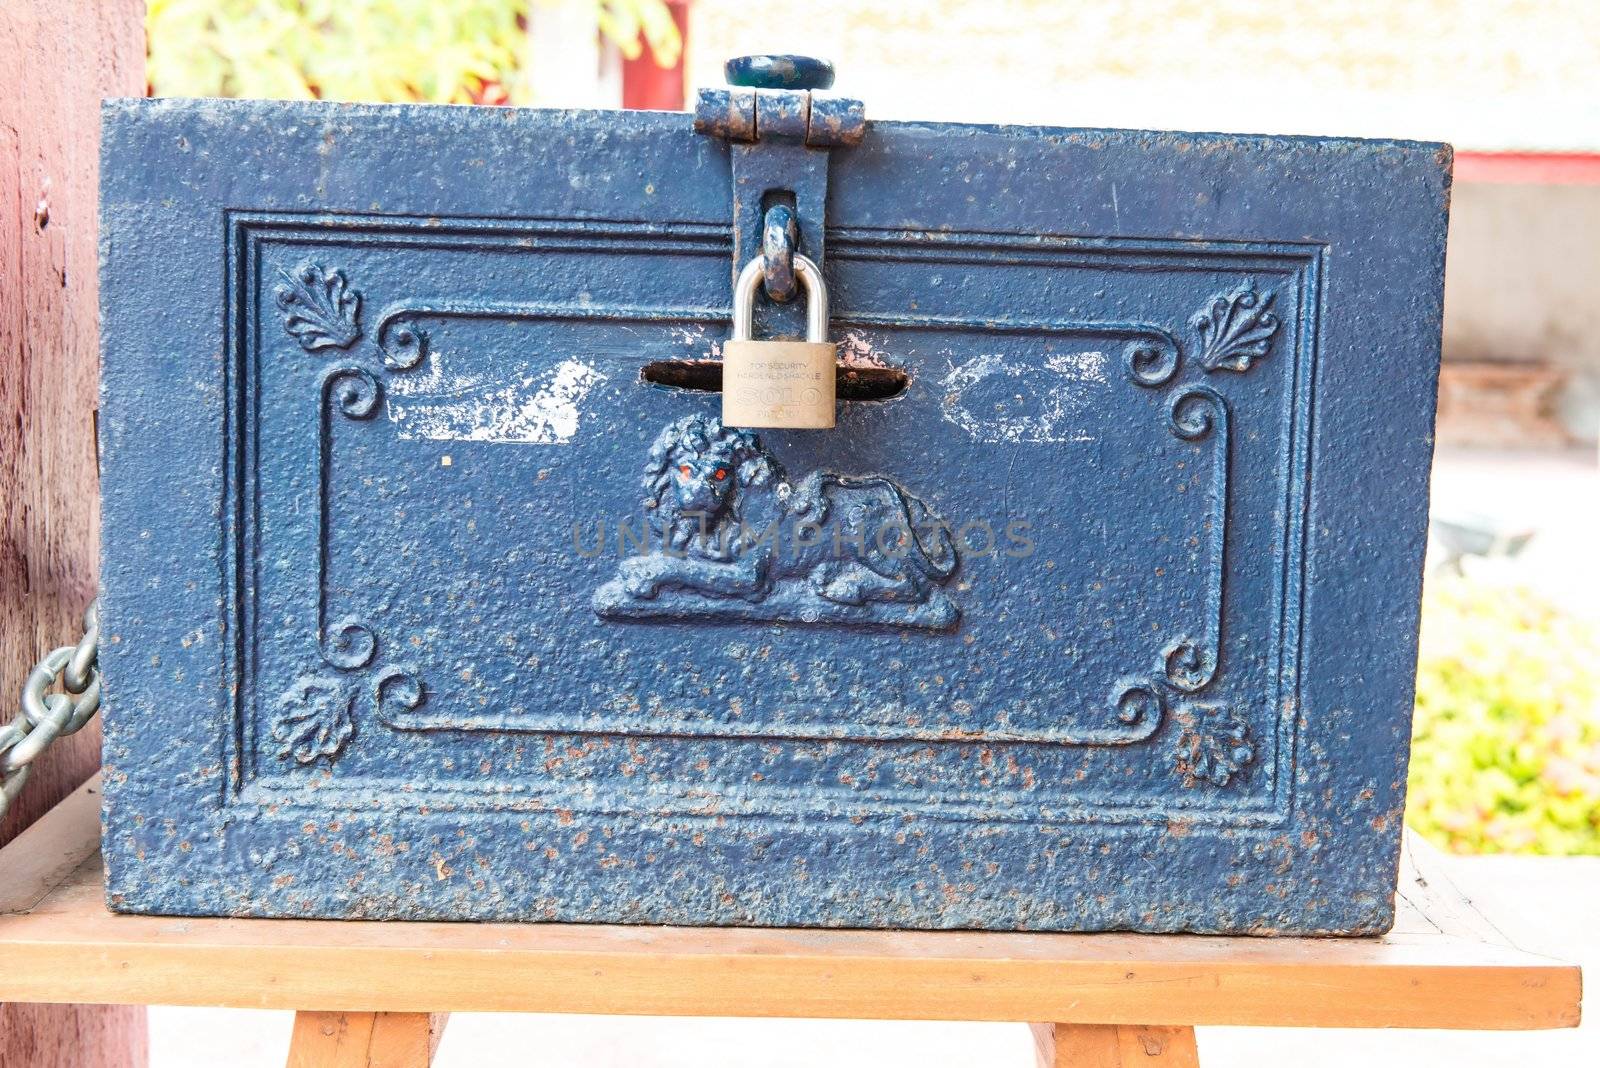 Old vintage metal box with pad lock, made from blue steel with lion carving symbol